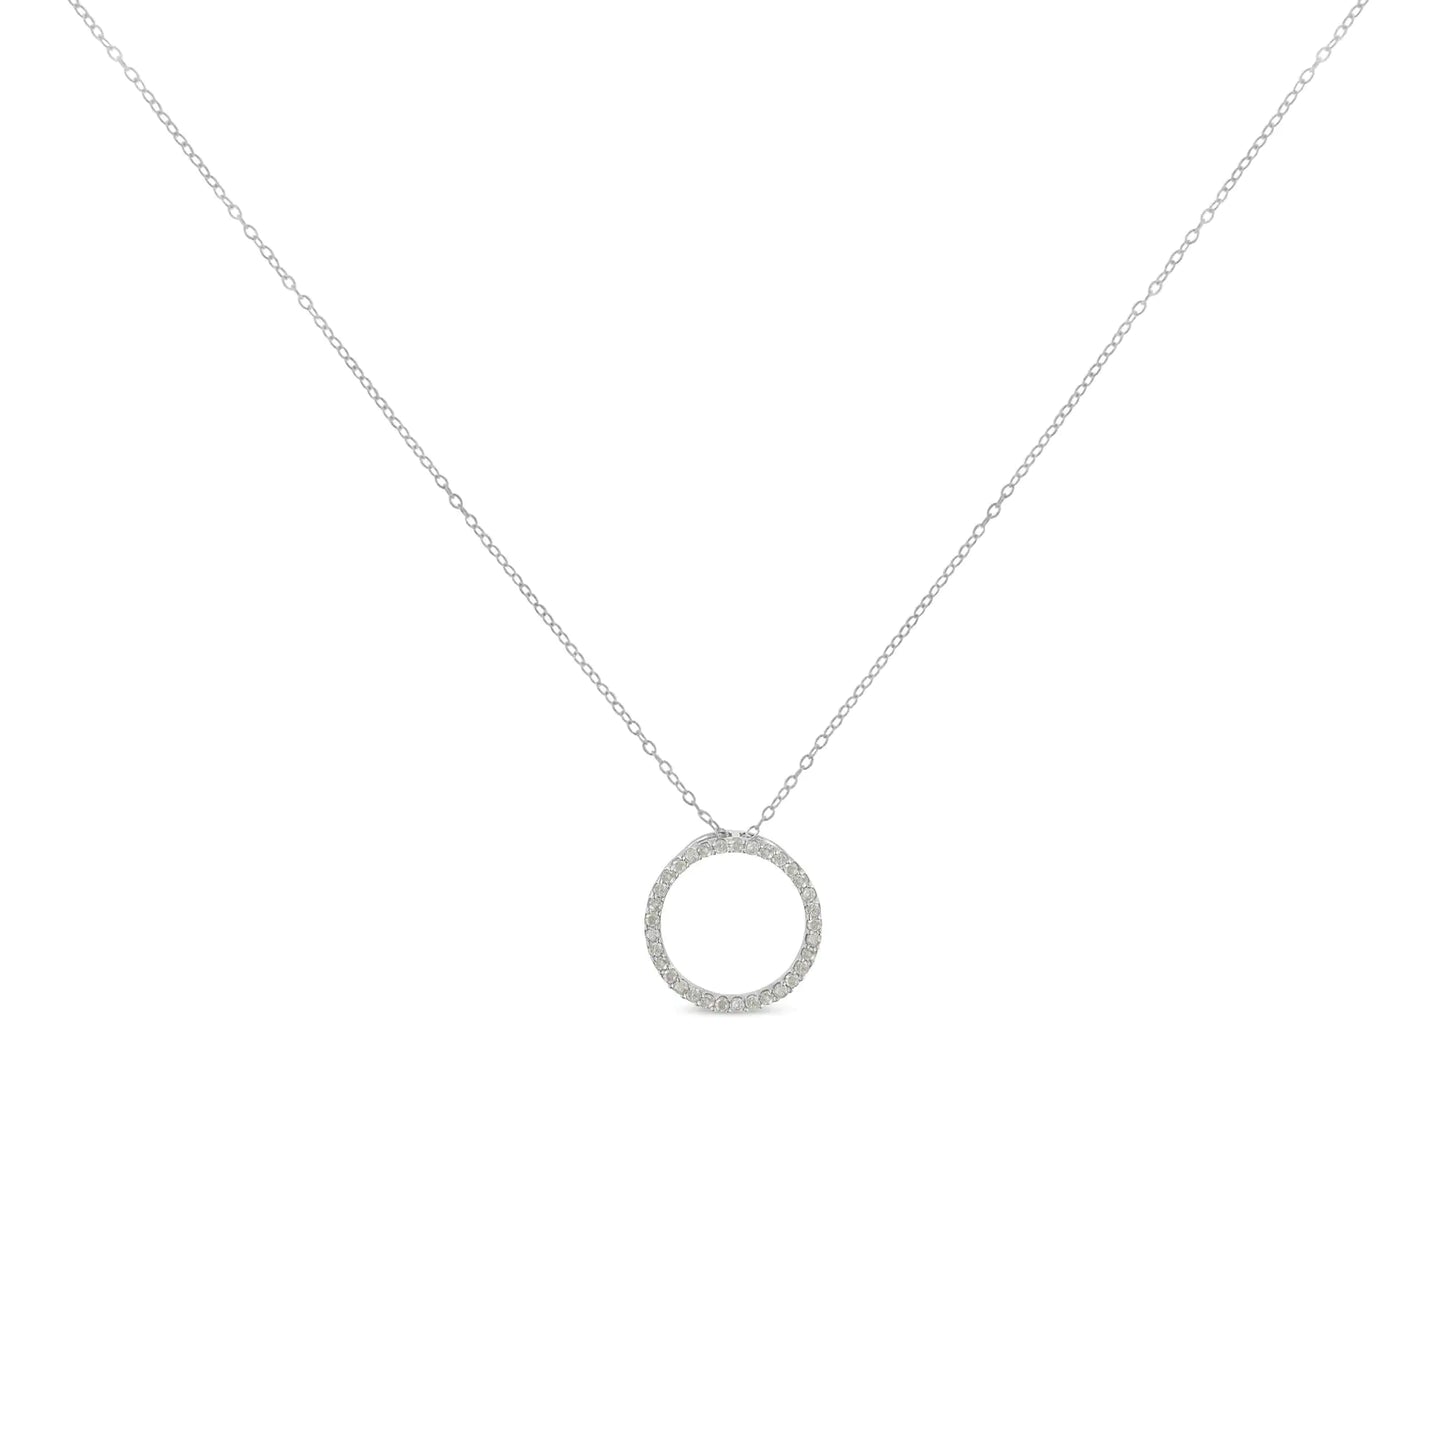 .925 Sterling Silver 1/3 Cttw Round-Cut Diamond Open Circle Halo 18" Pendant Necklace (I-J Color, I2-I3 Clarity)